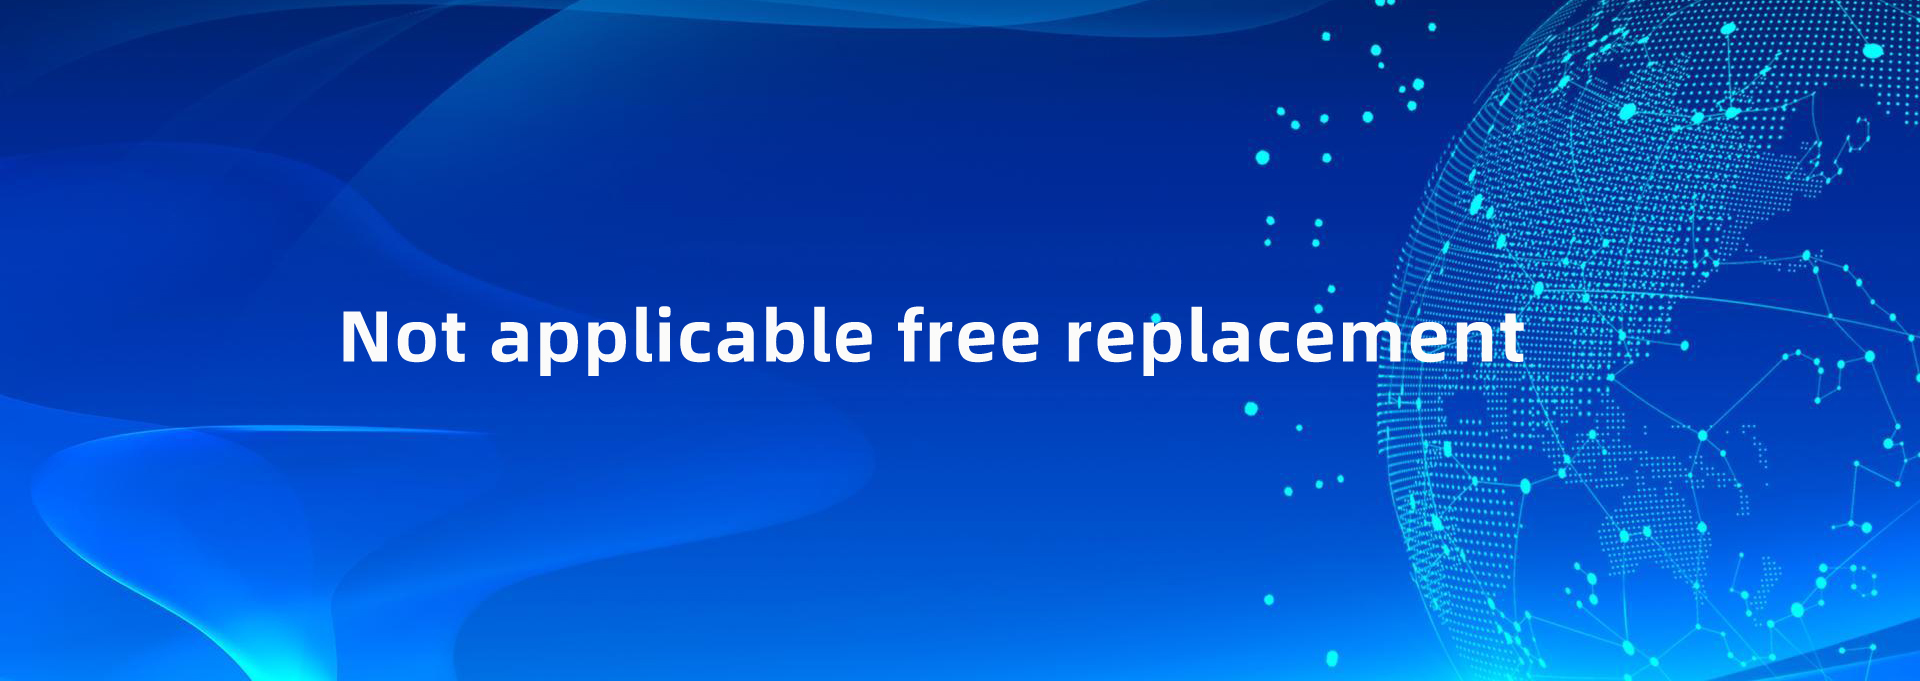 Not applicable free replacement